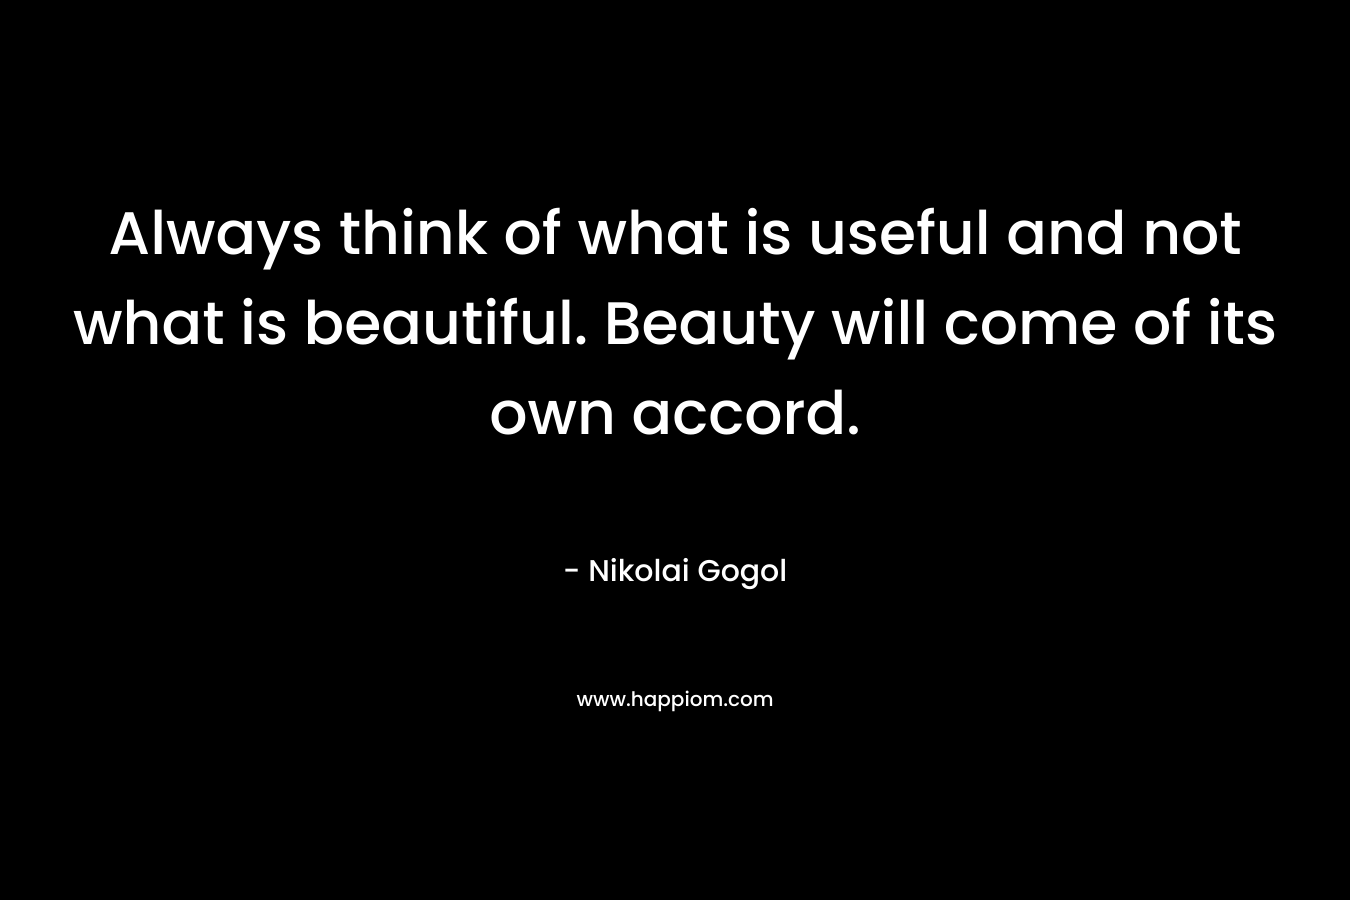 Always think of what is useful and not what is beautiful. Beauty will come of its own accord. – Nikolai Gogol